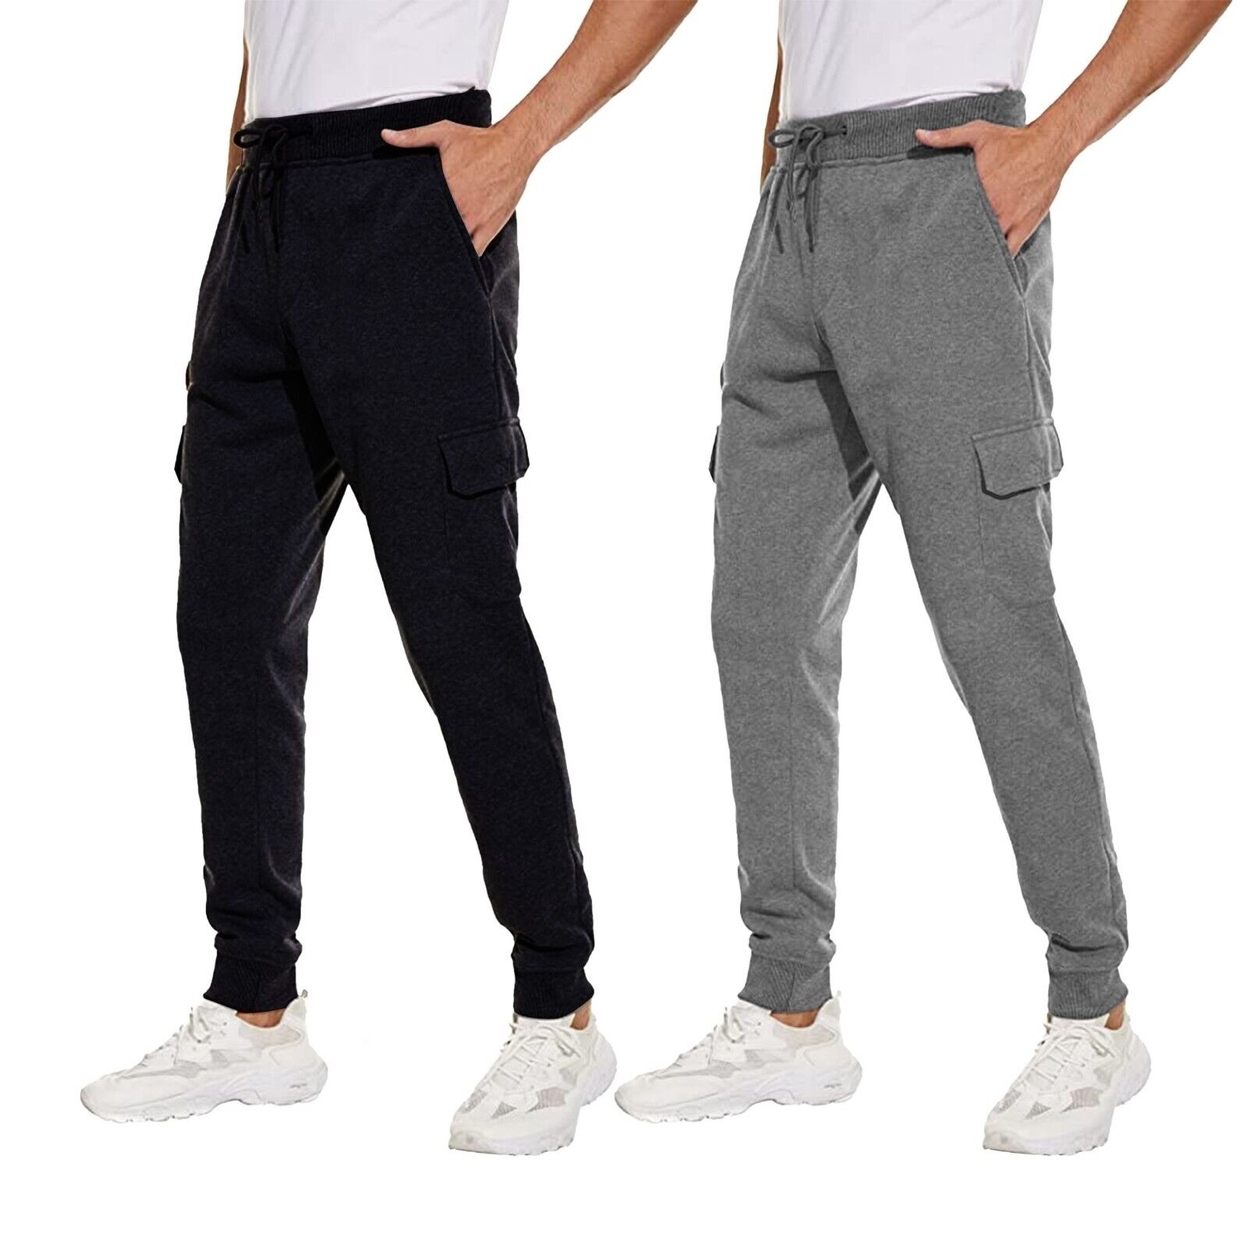 Multi-Pack Men's Ultra Soft Winter Warm Thick Athletic Sherpa Lined Jogger Pants - Assorted, 2, Xx-large